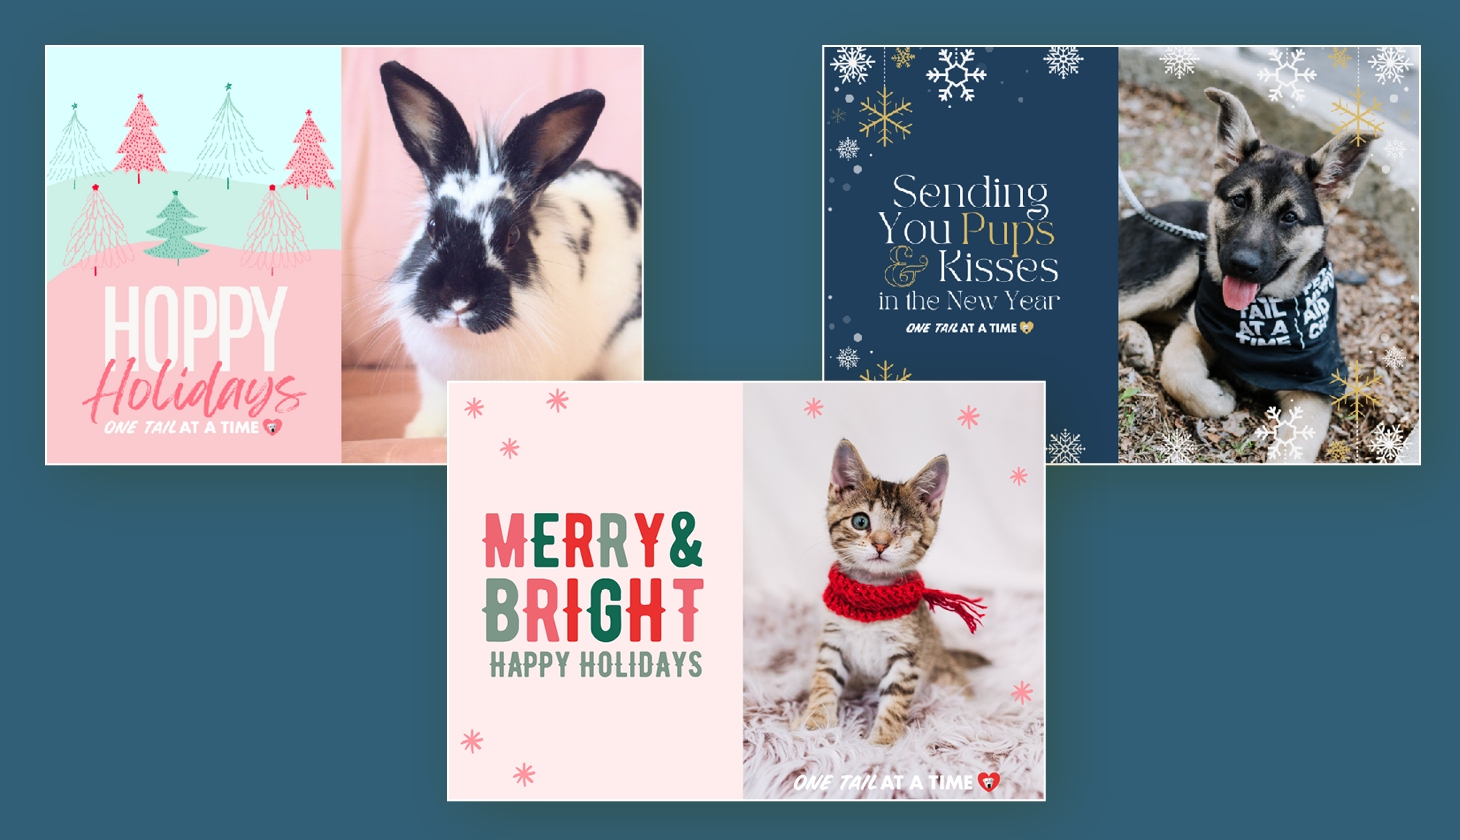 Three sample fundraising eCards designed by the animal rescue One Tail at a Time to supplement their nonprofit revenue streams.